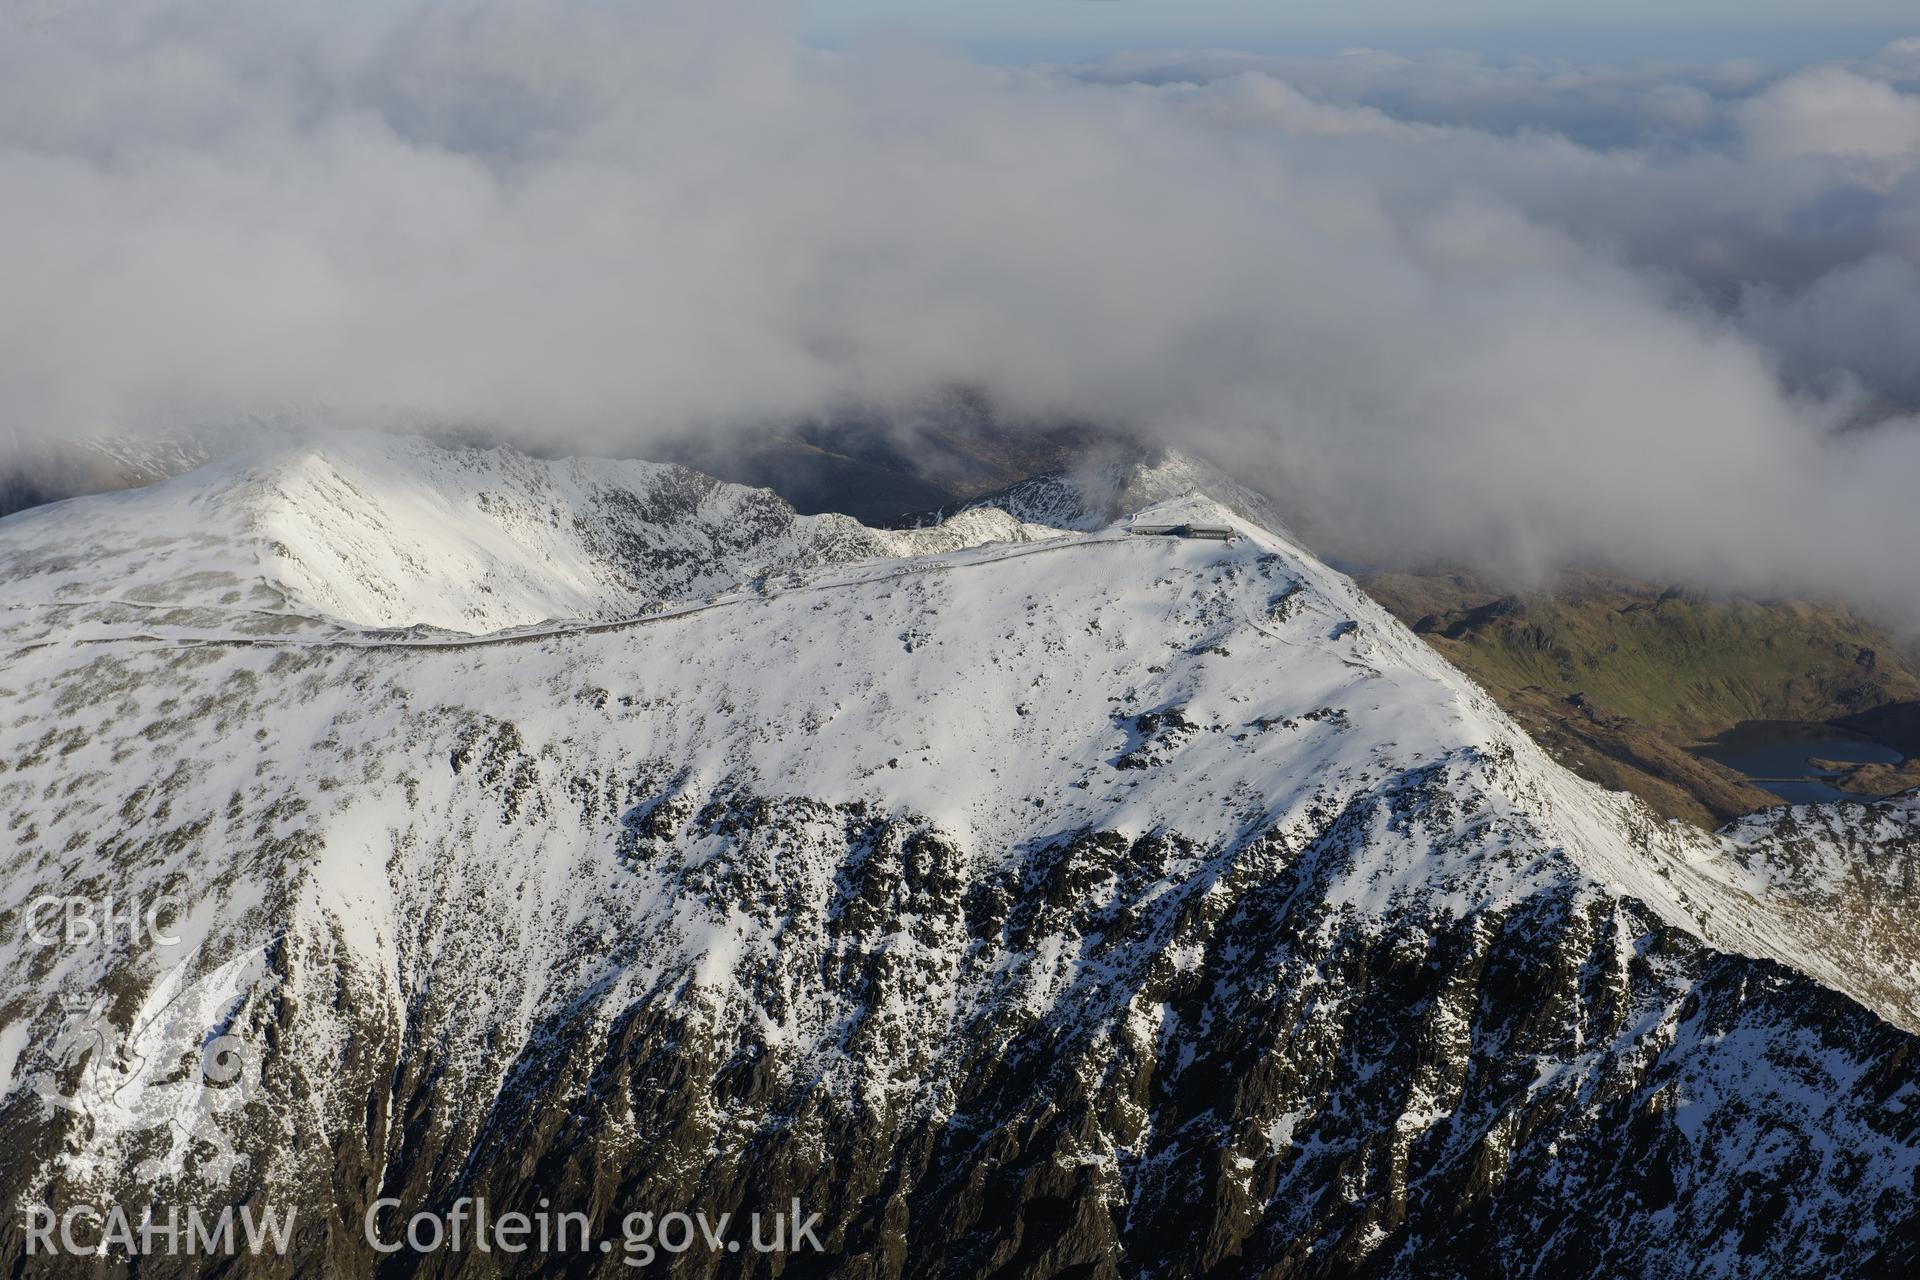 RCAHMW colour oblique photograph of Snowdon summit under snow, view from the west. Taken by Toby Driver on 10/12/2012.